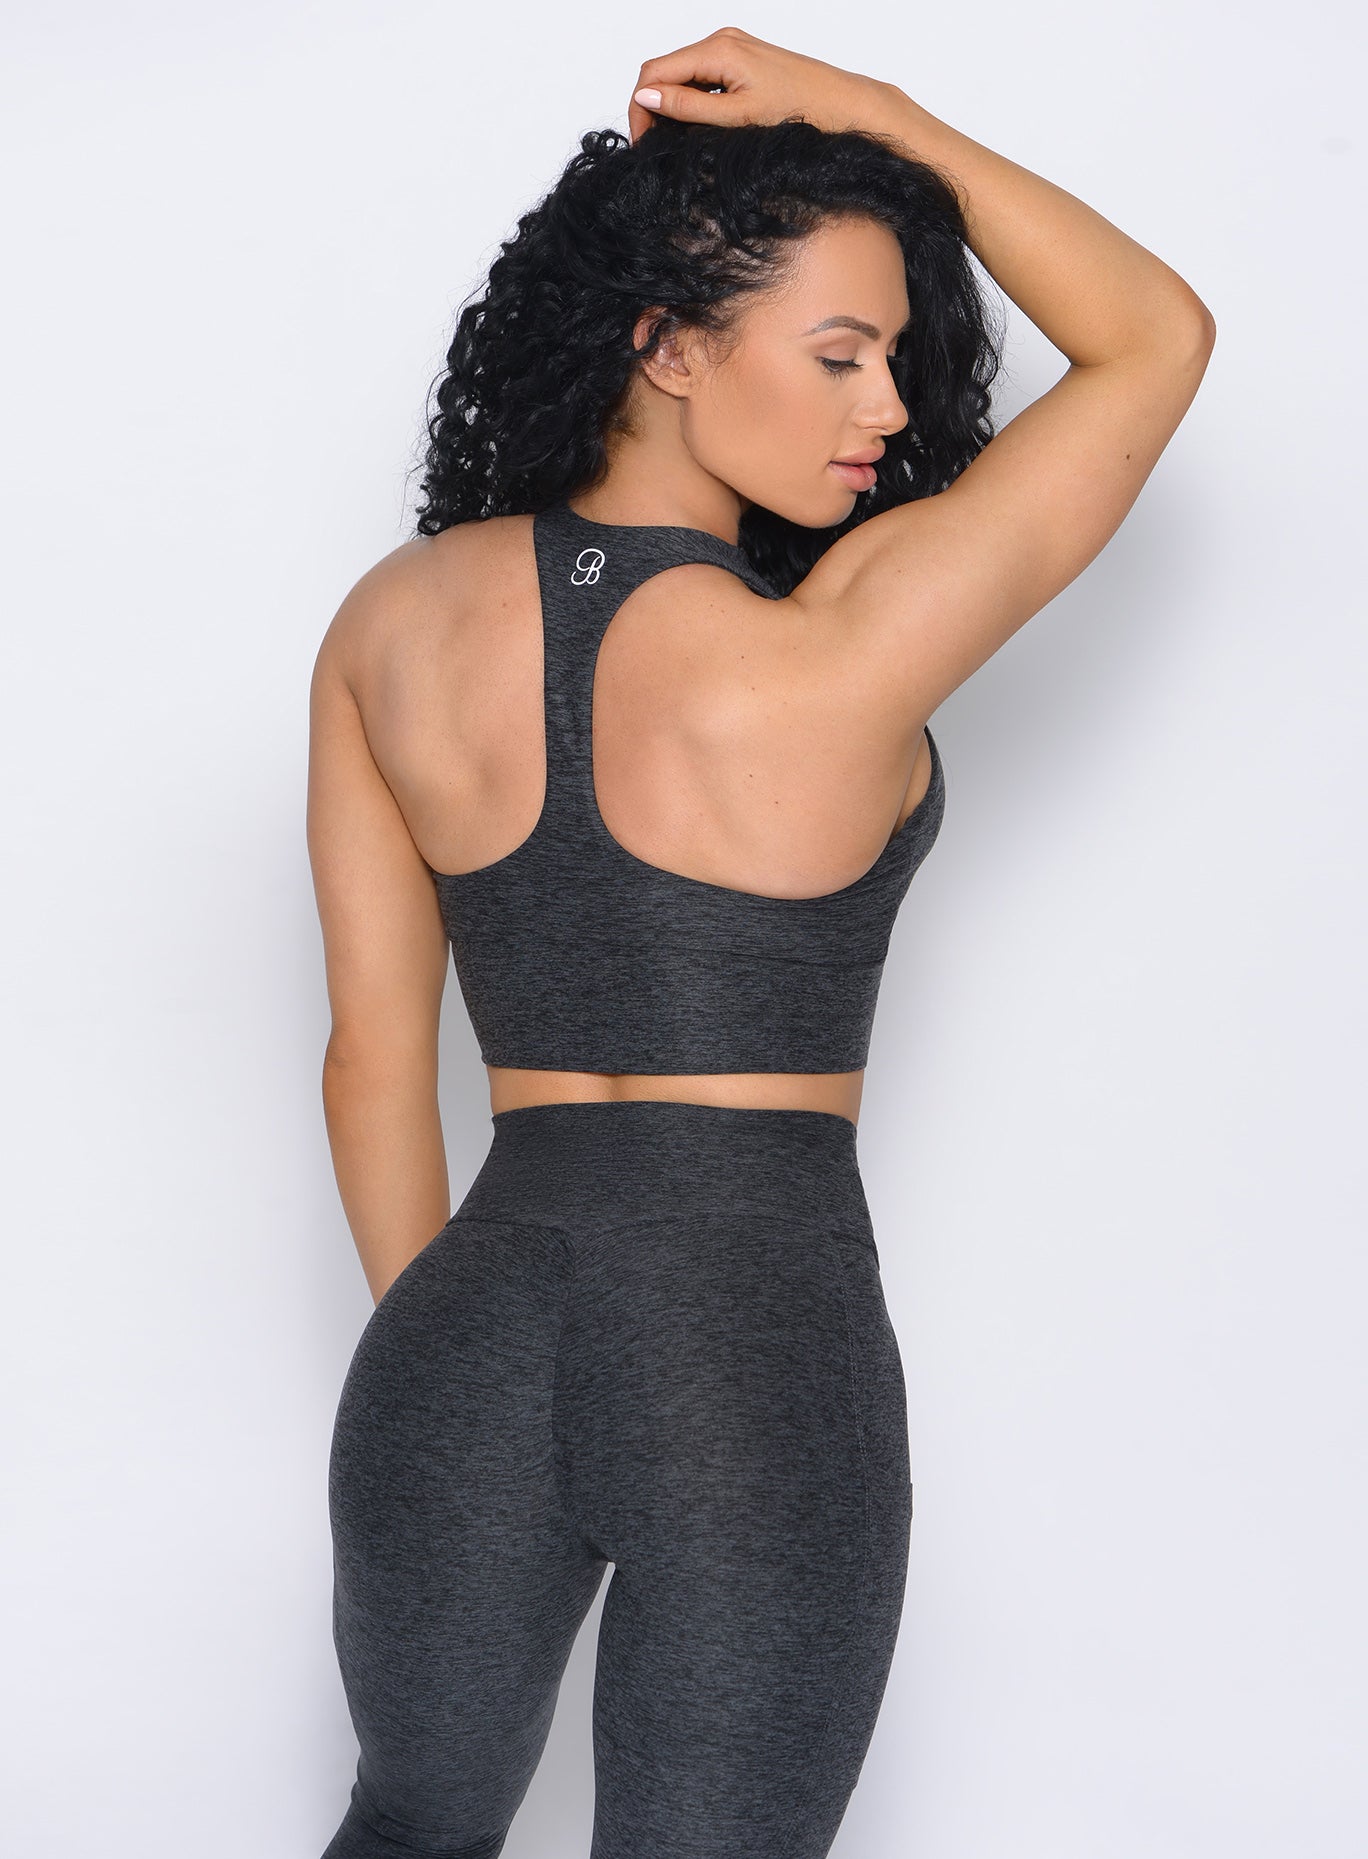 Back view of the model in our edgy longline bra in charcoal color and a matching leggings